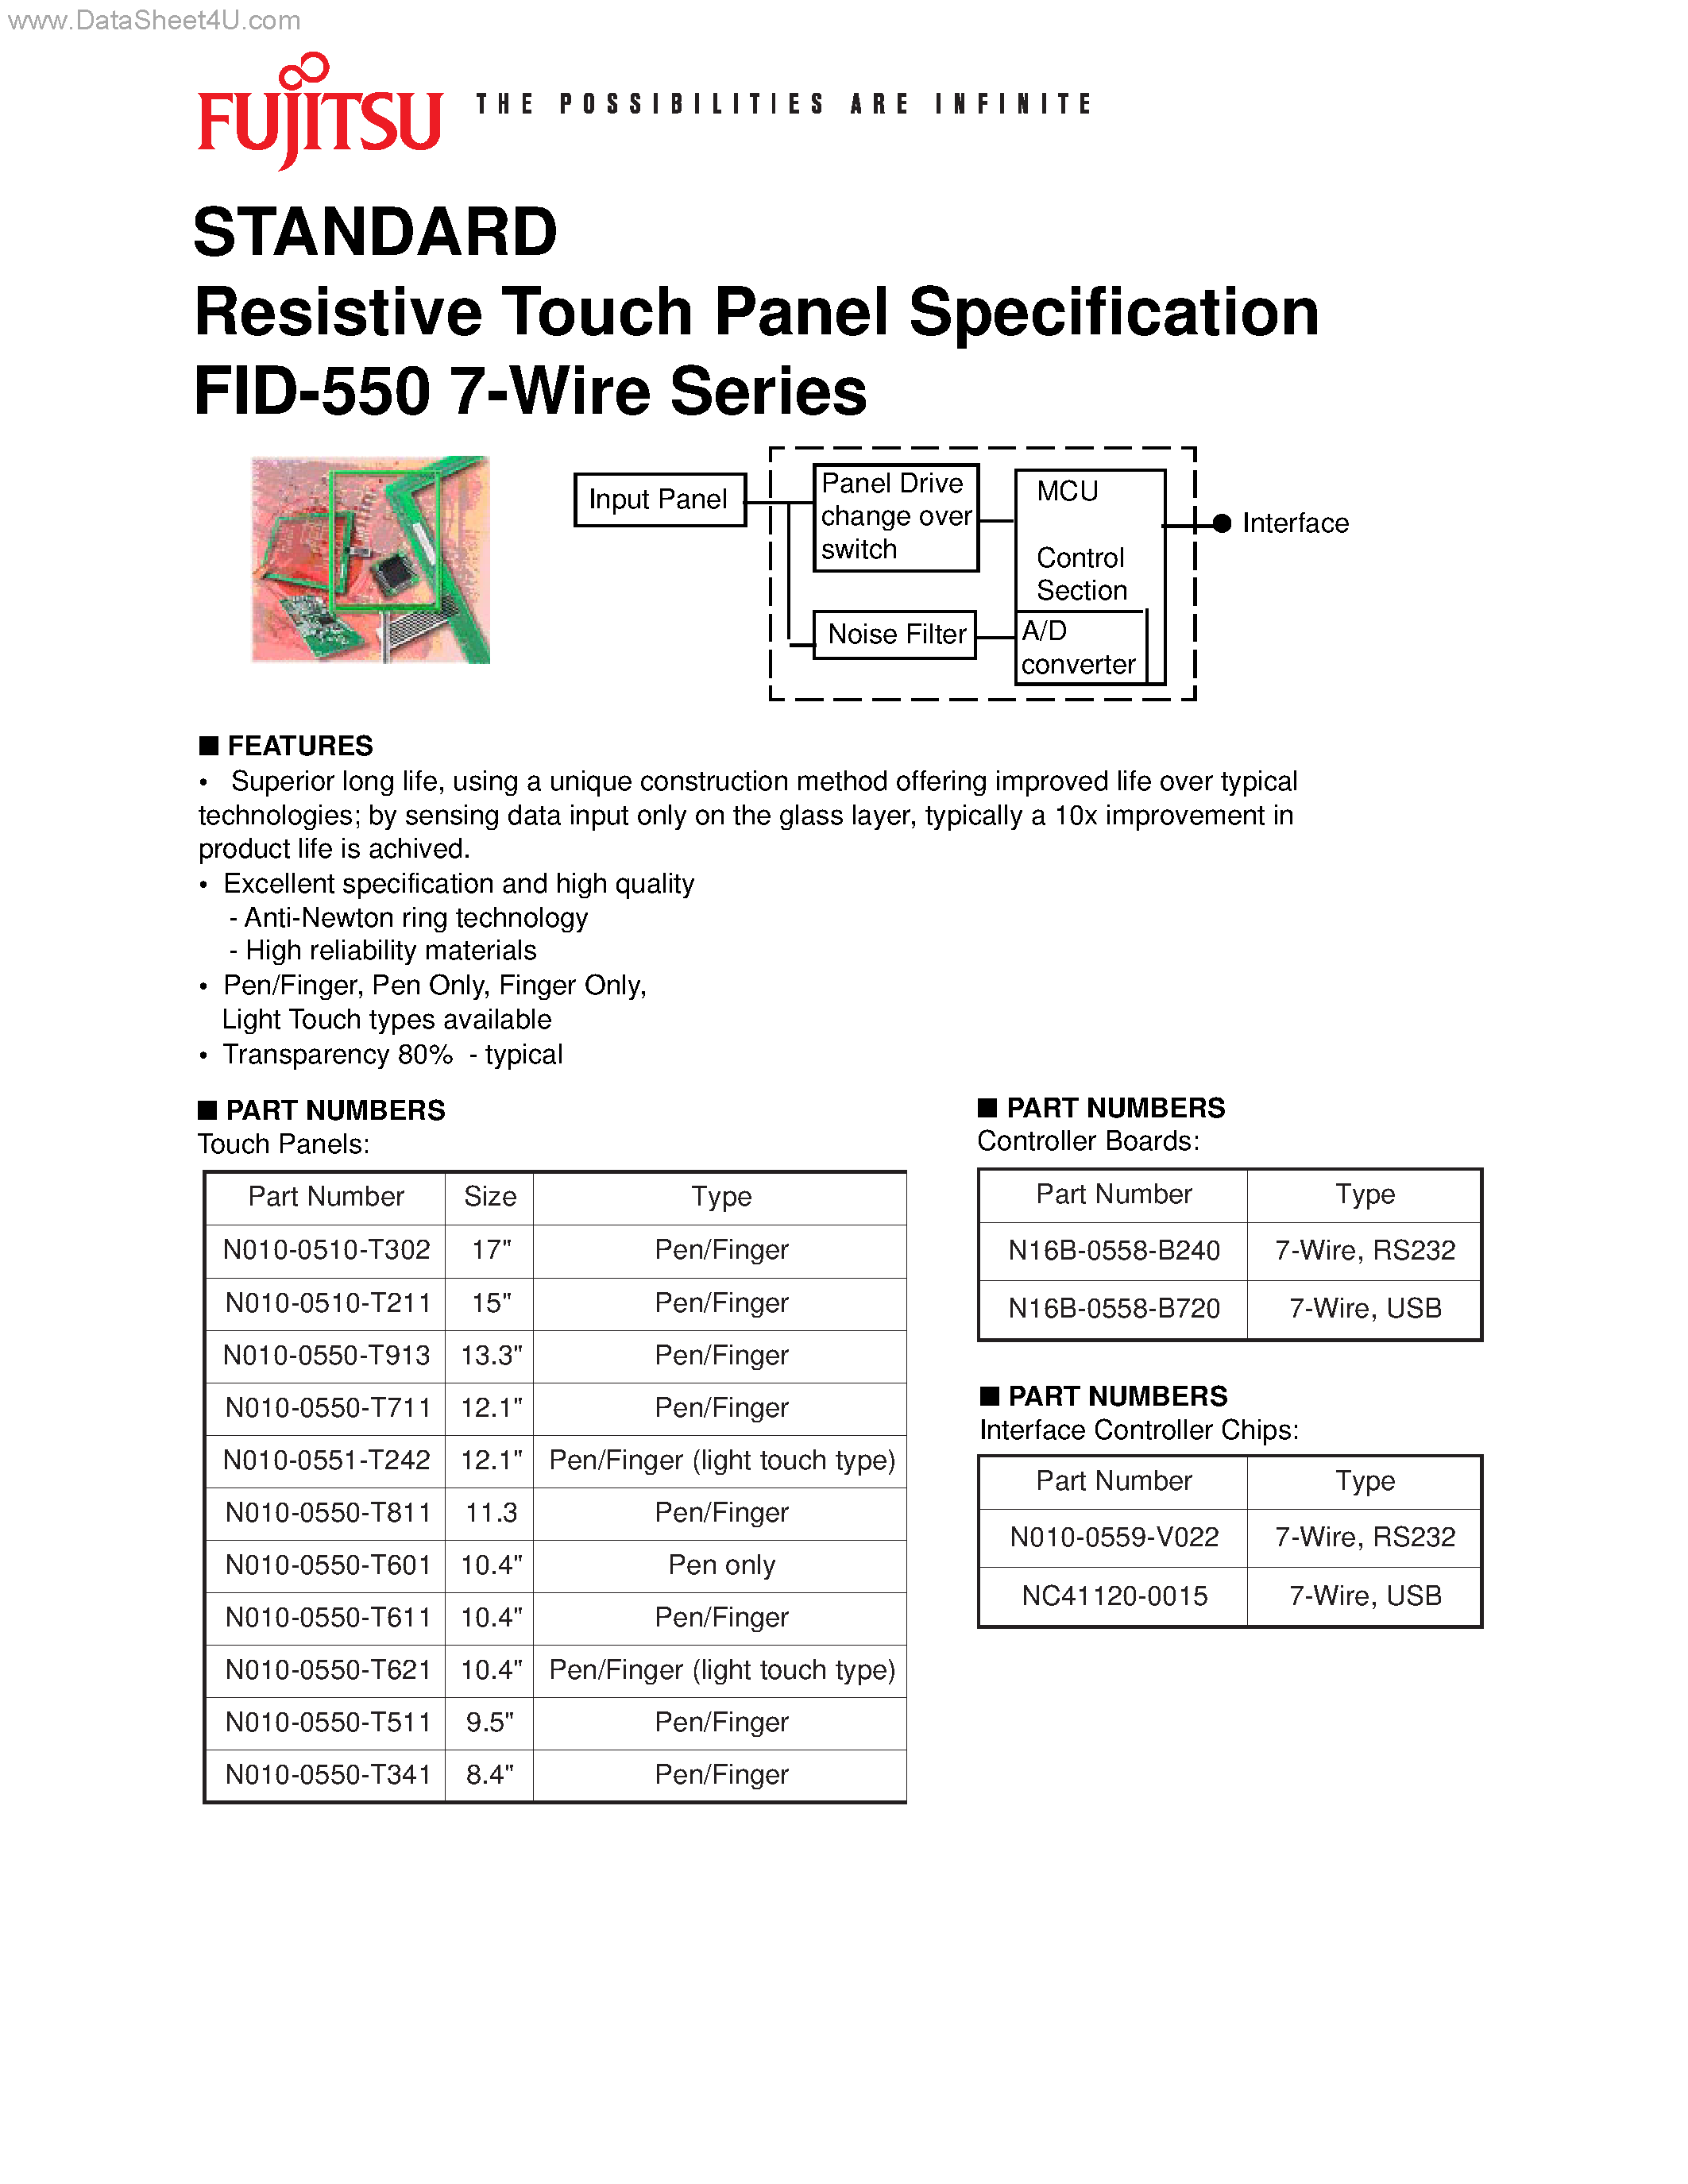 Даташит NC41120-0015 - Resistive Touch Panel Specification страница 1